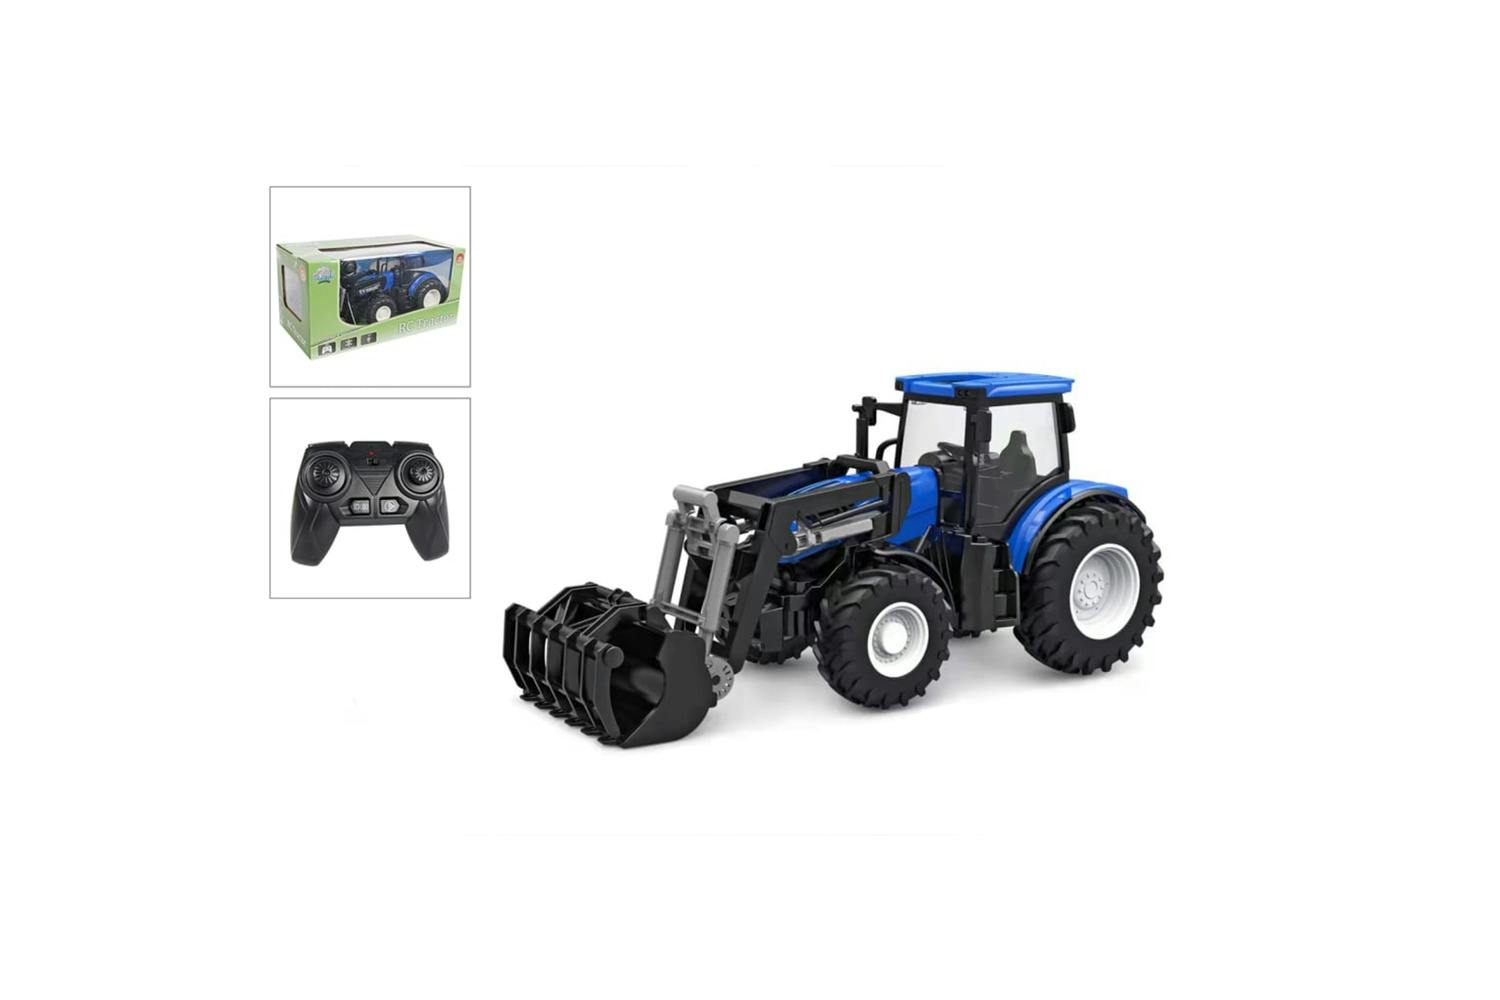 Kids Globe 444496 Rc Tractor 2.4 Ghz 27 Cm Blue And Black